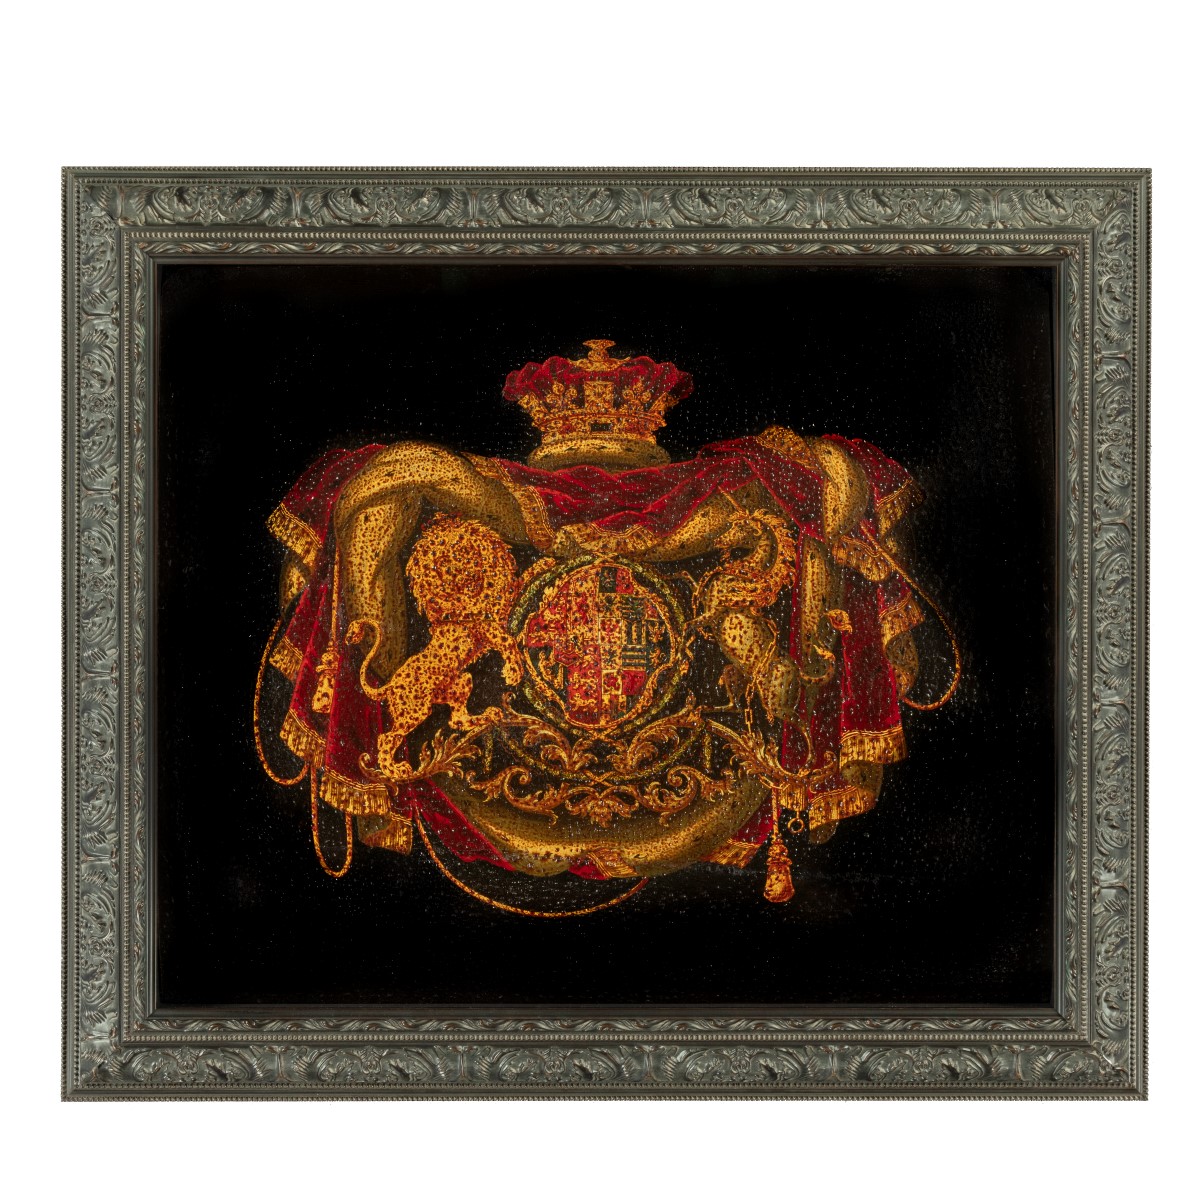 Queen Adelaide’s Coach Panels framed